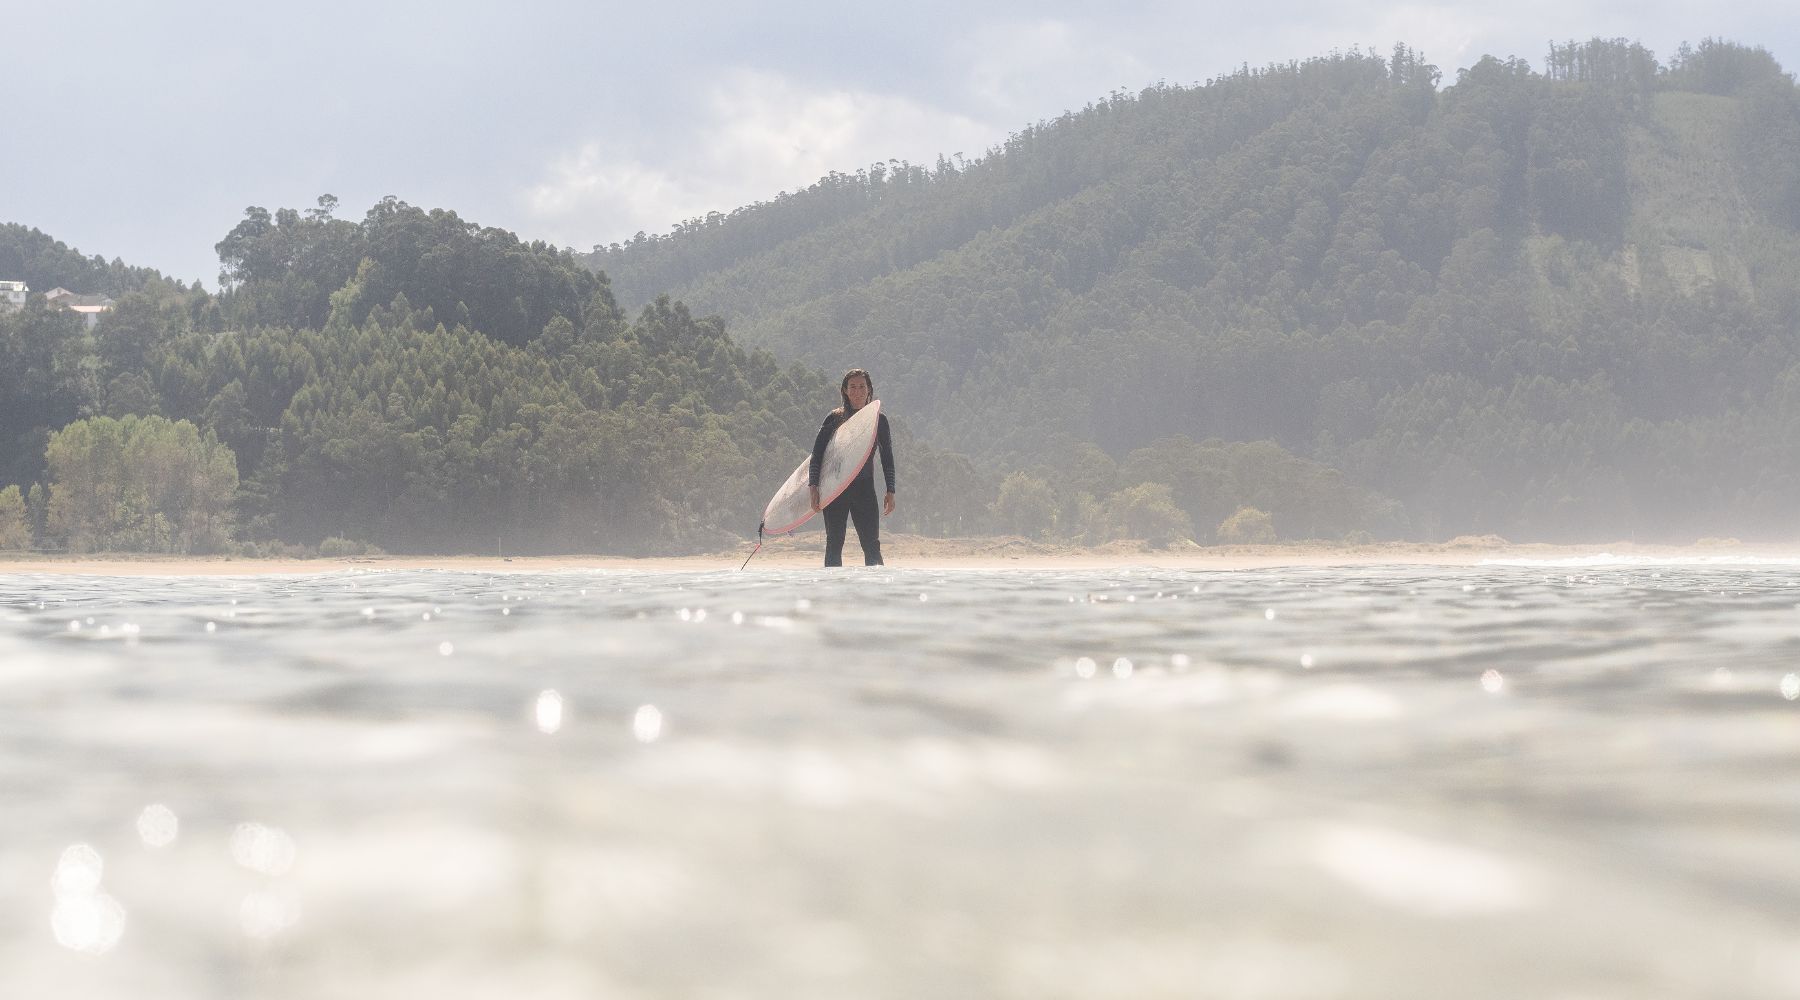 How Can Yoga Improve Your Surfing Skills?